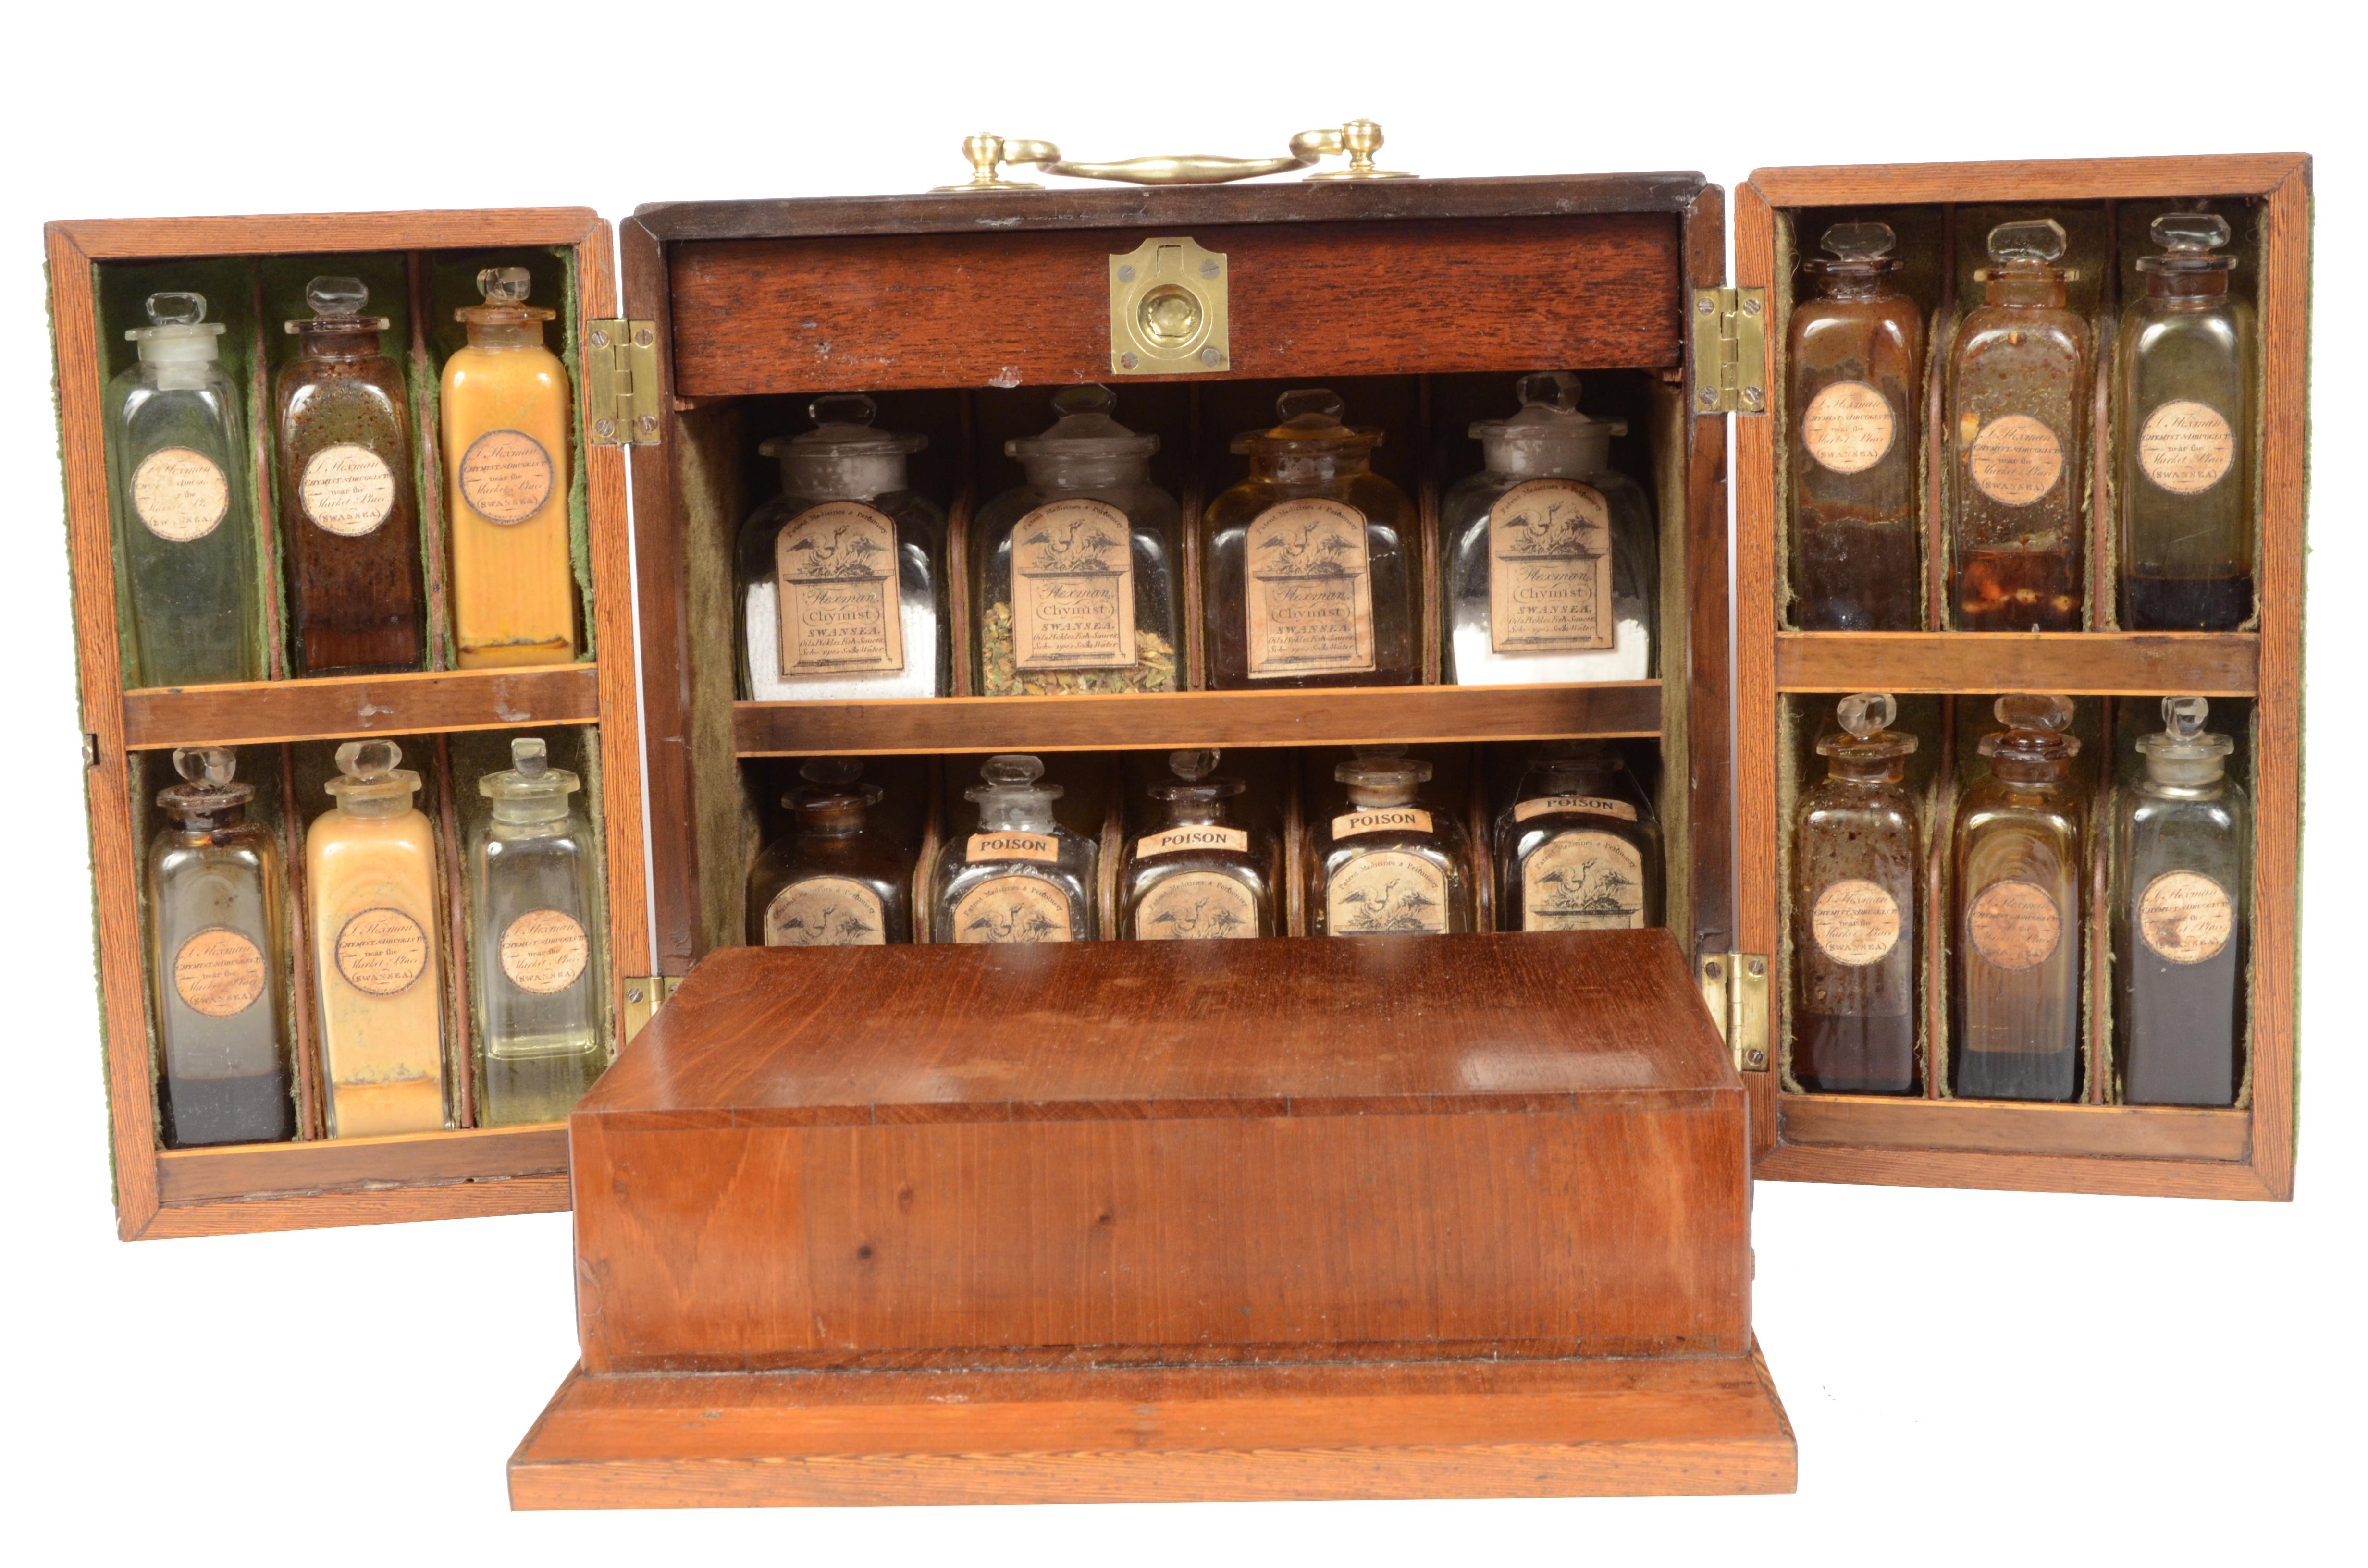 English apothecary cabinet dated to the first half of the nineteenth century, mahogany box, brass handle and hinges and complete with key. The cabinet with a rectangular base is formed by a central compartment with two shutters in which are housed